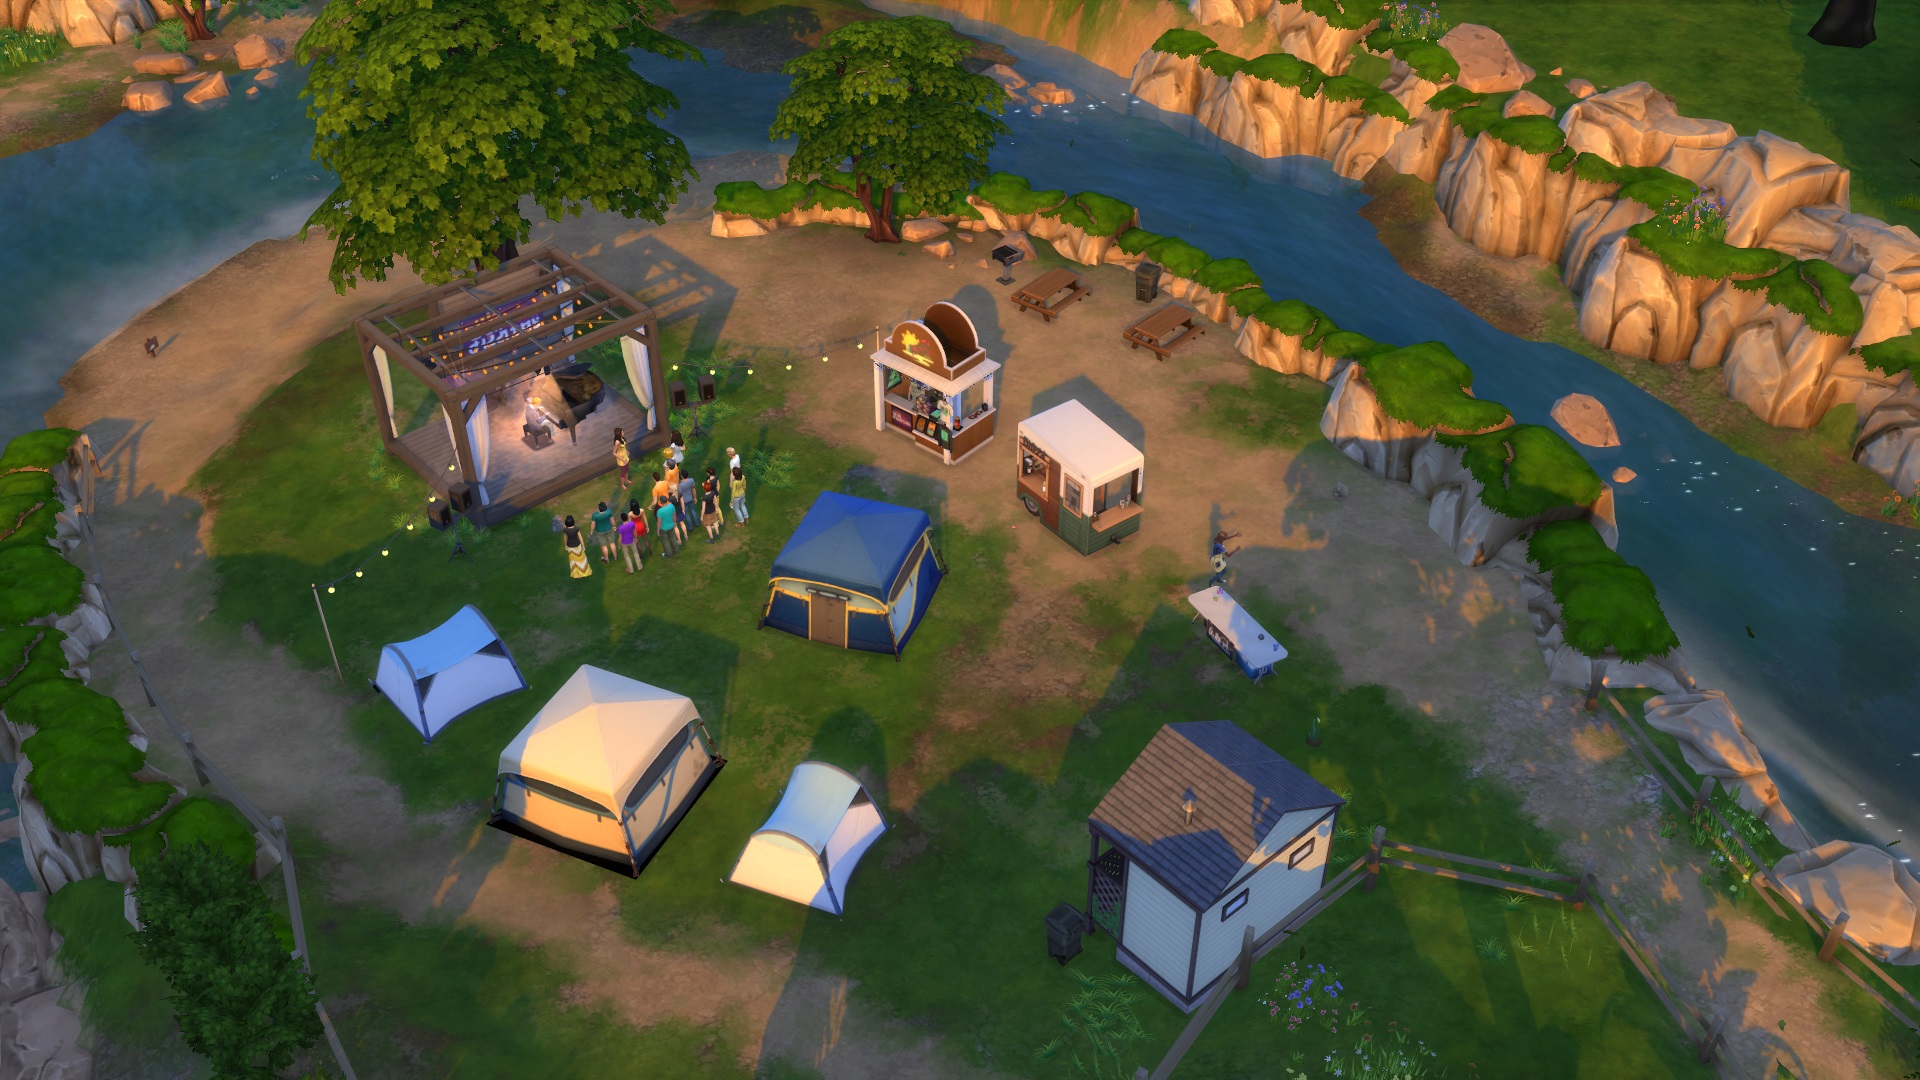 The Sims 4: a large blue tent placed in the middle the Sims Sessions festival site.